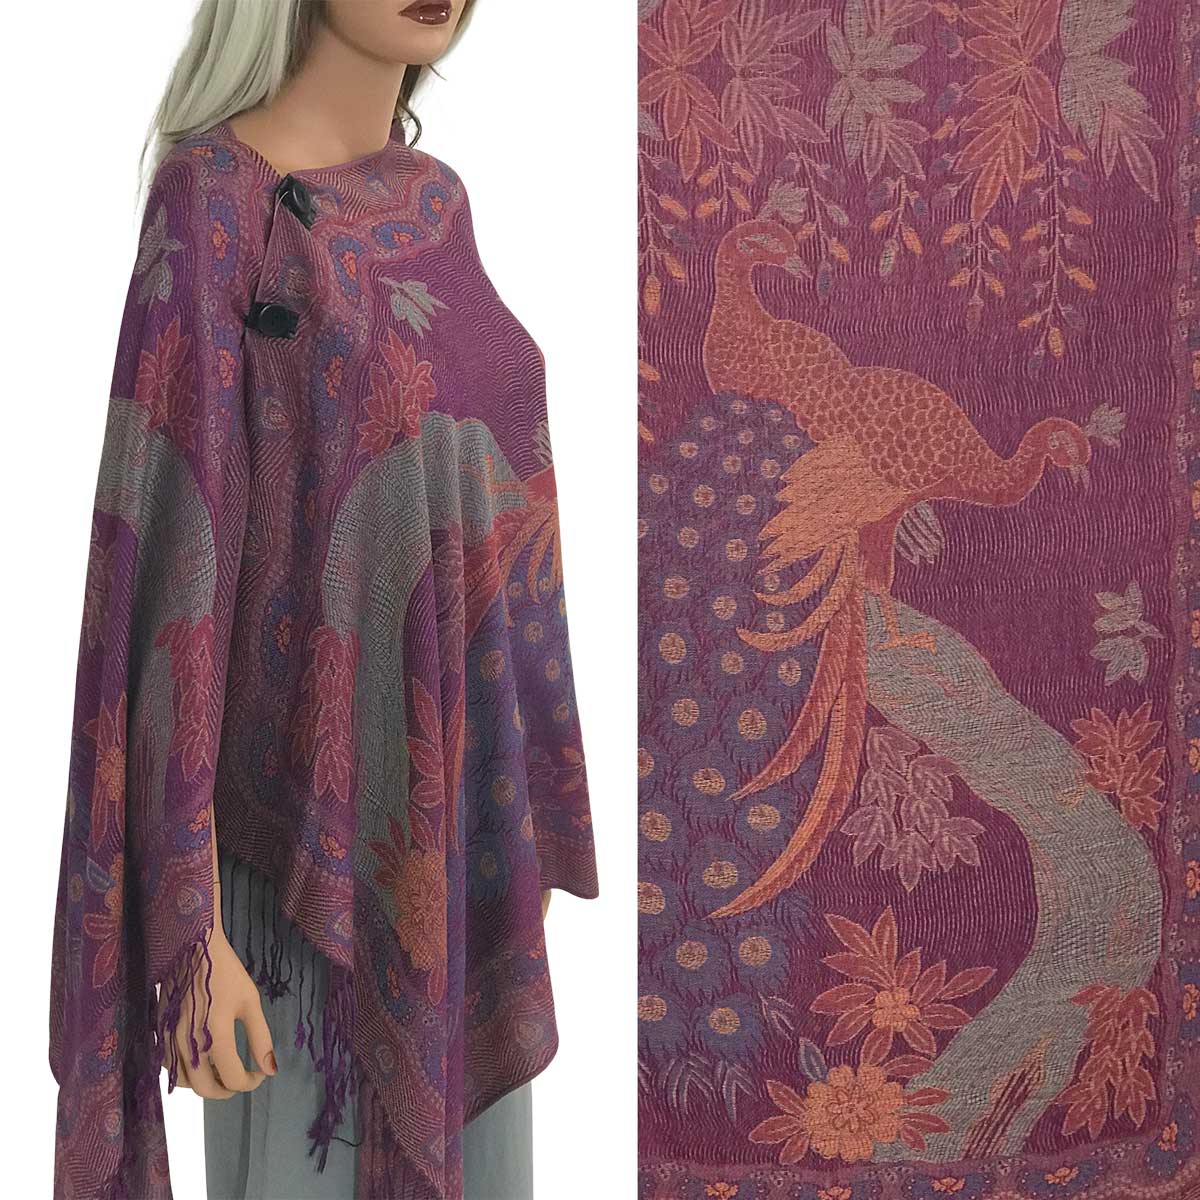 3109 - Pashmina Style Button Shawls Peacock - #16<br>
Pashmina Style Button Shawl - 